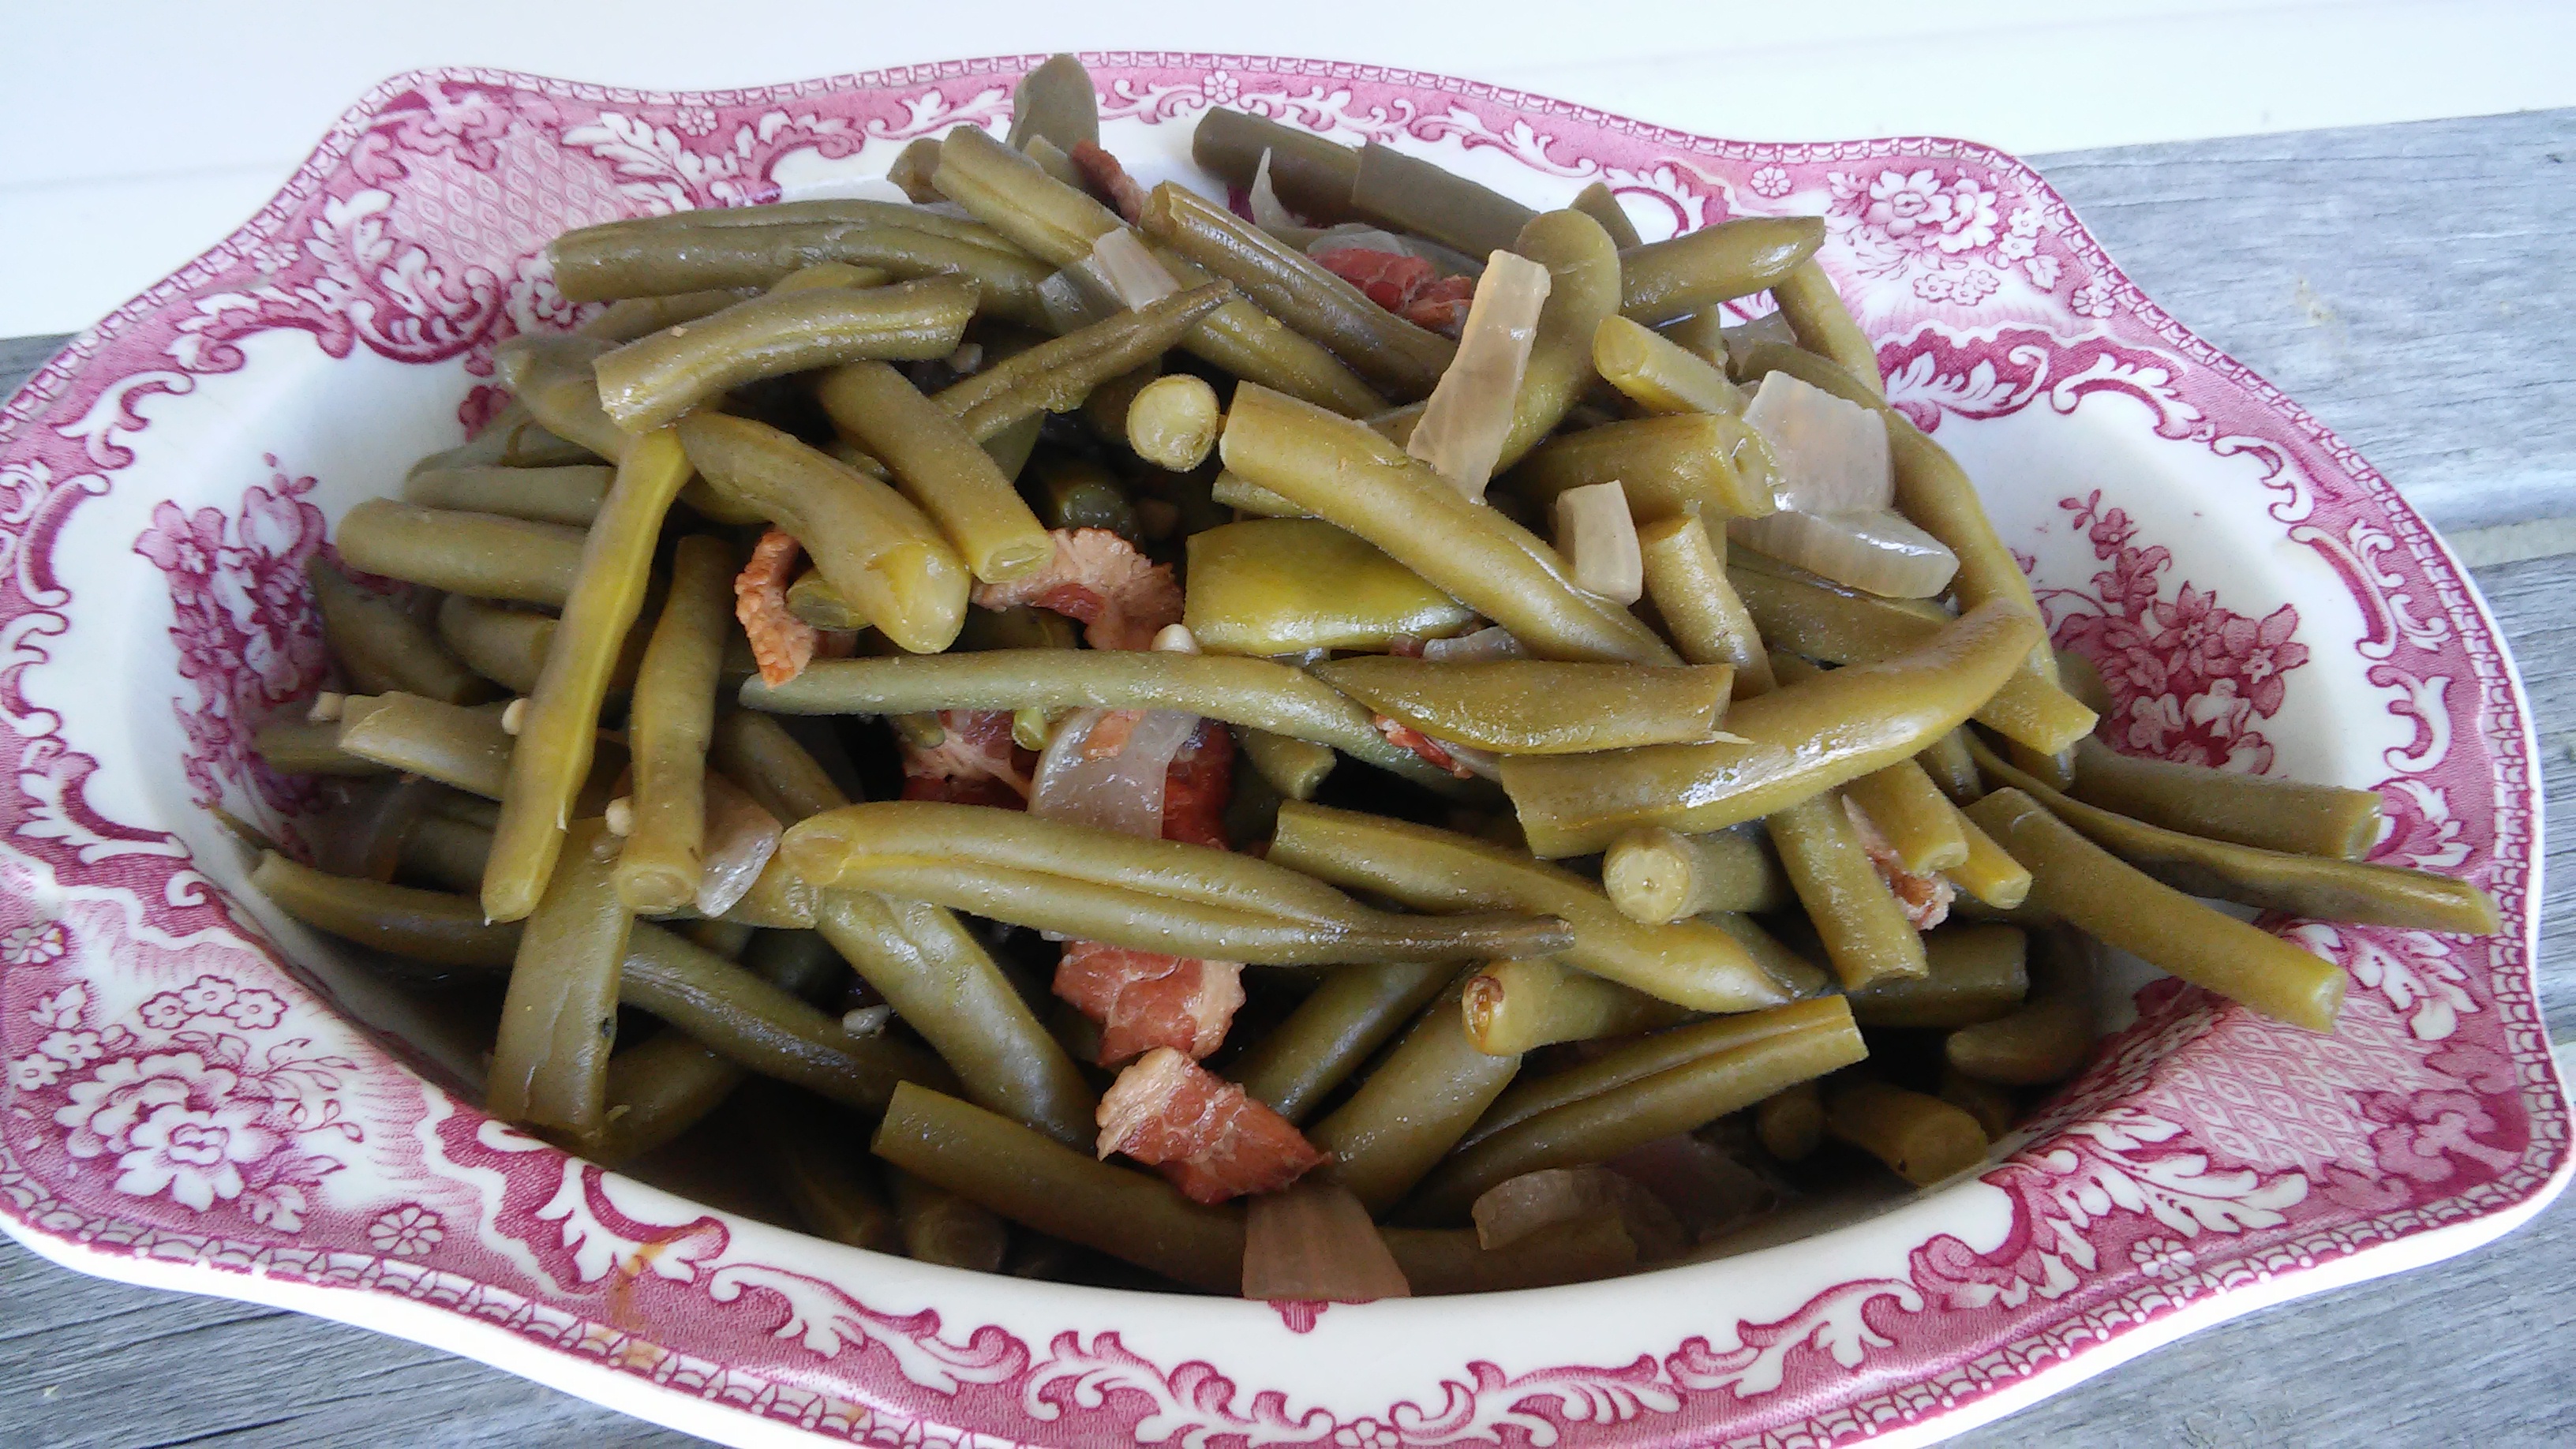 Savory Slow Cooker Green Beans